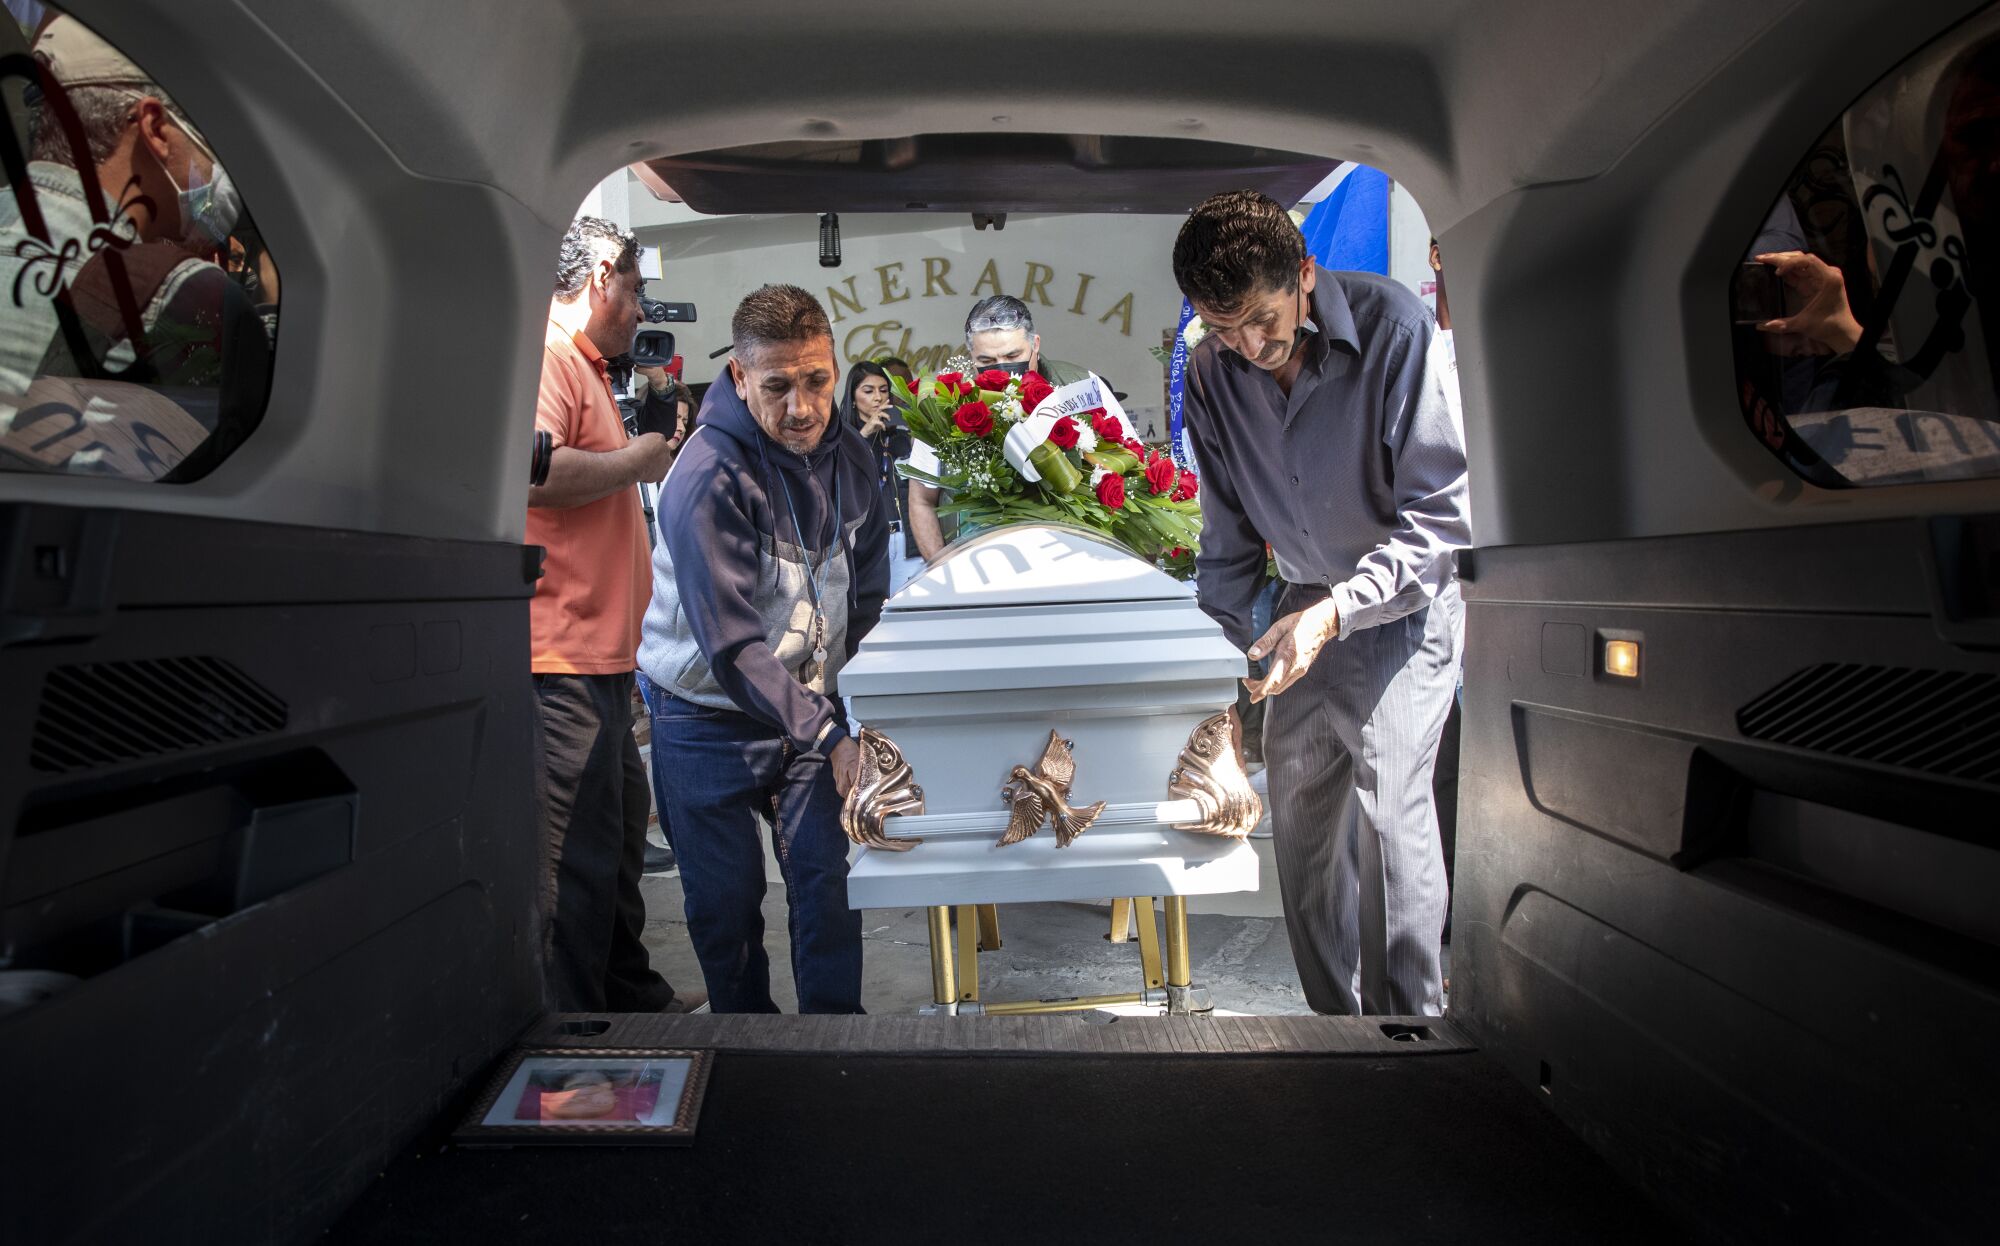 Two men place a casket of a woman in a hearse.